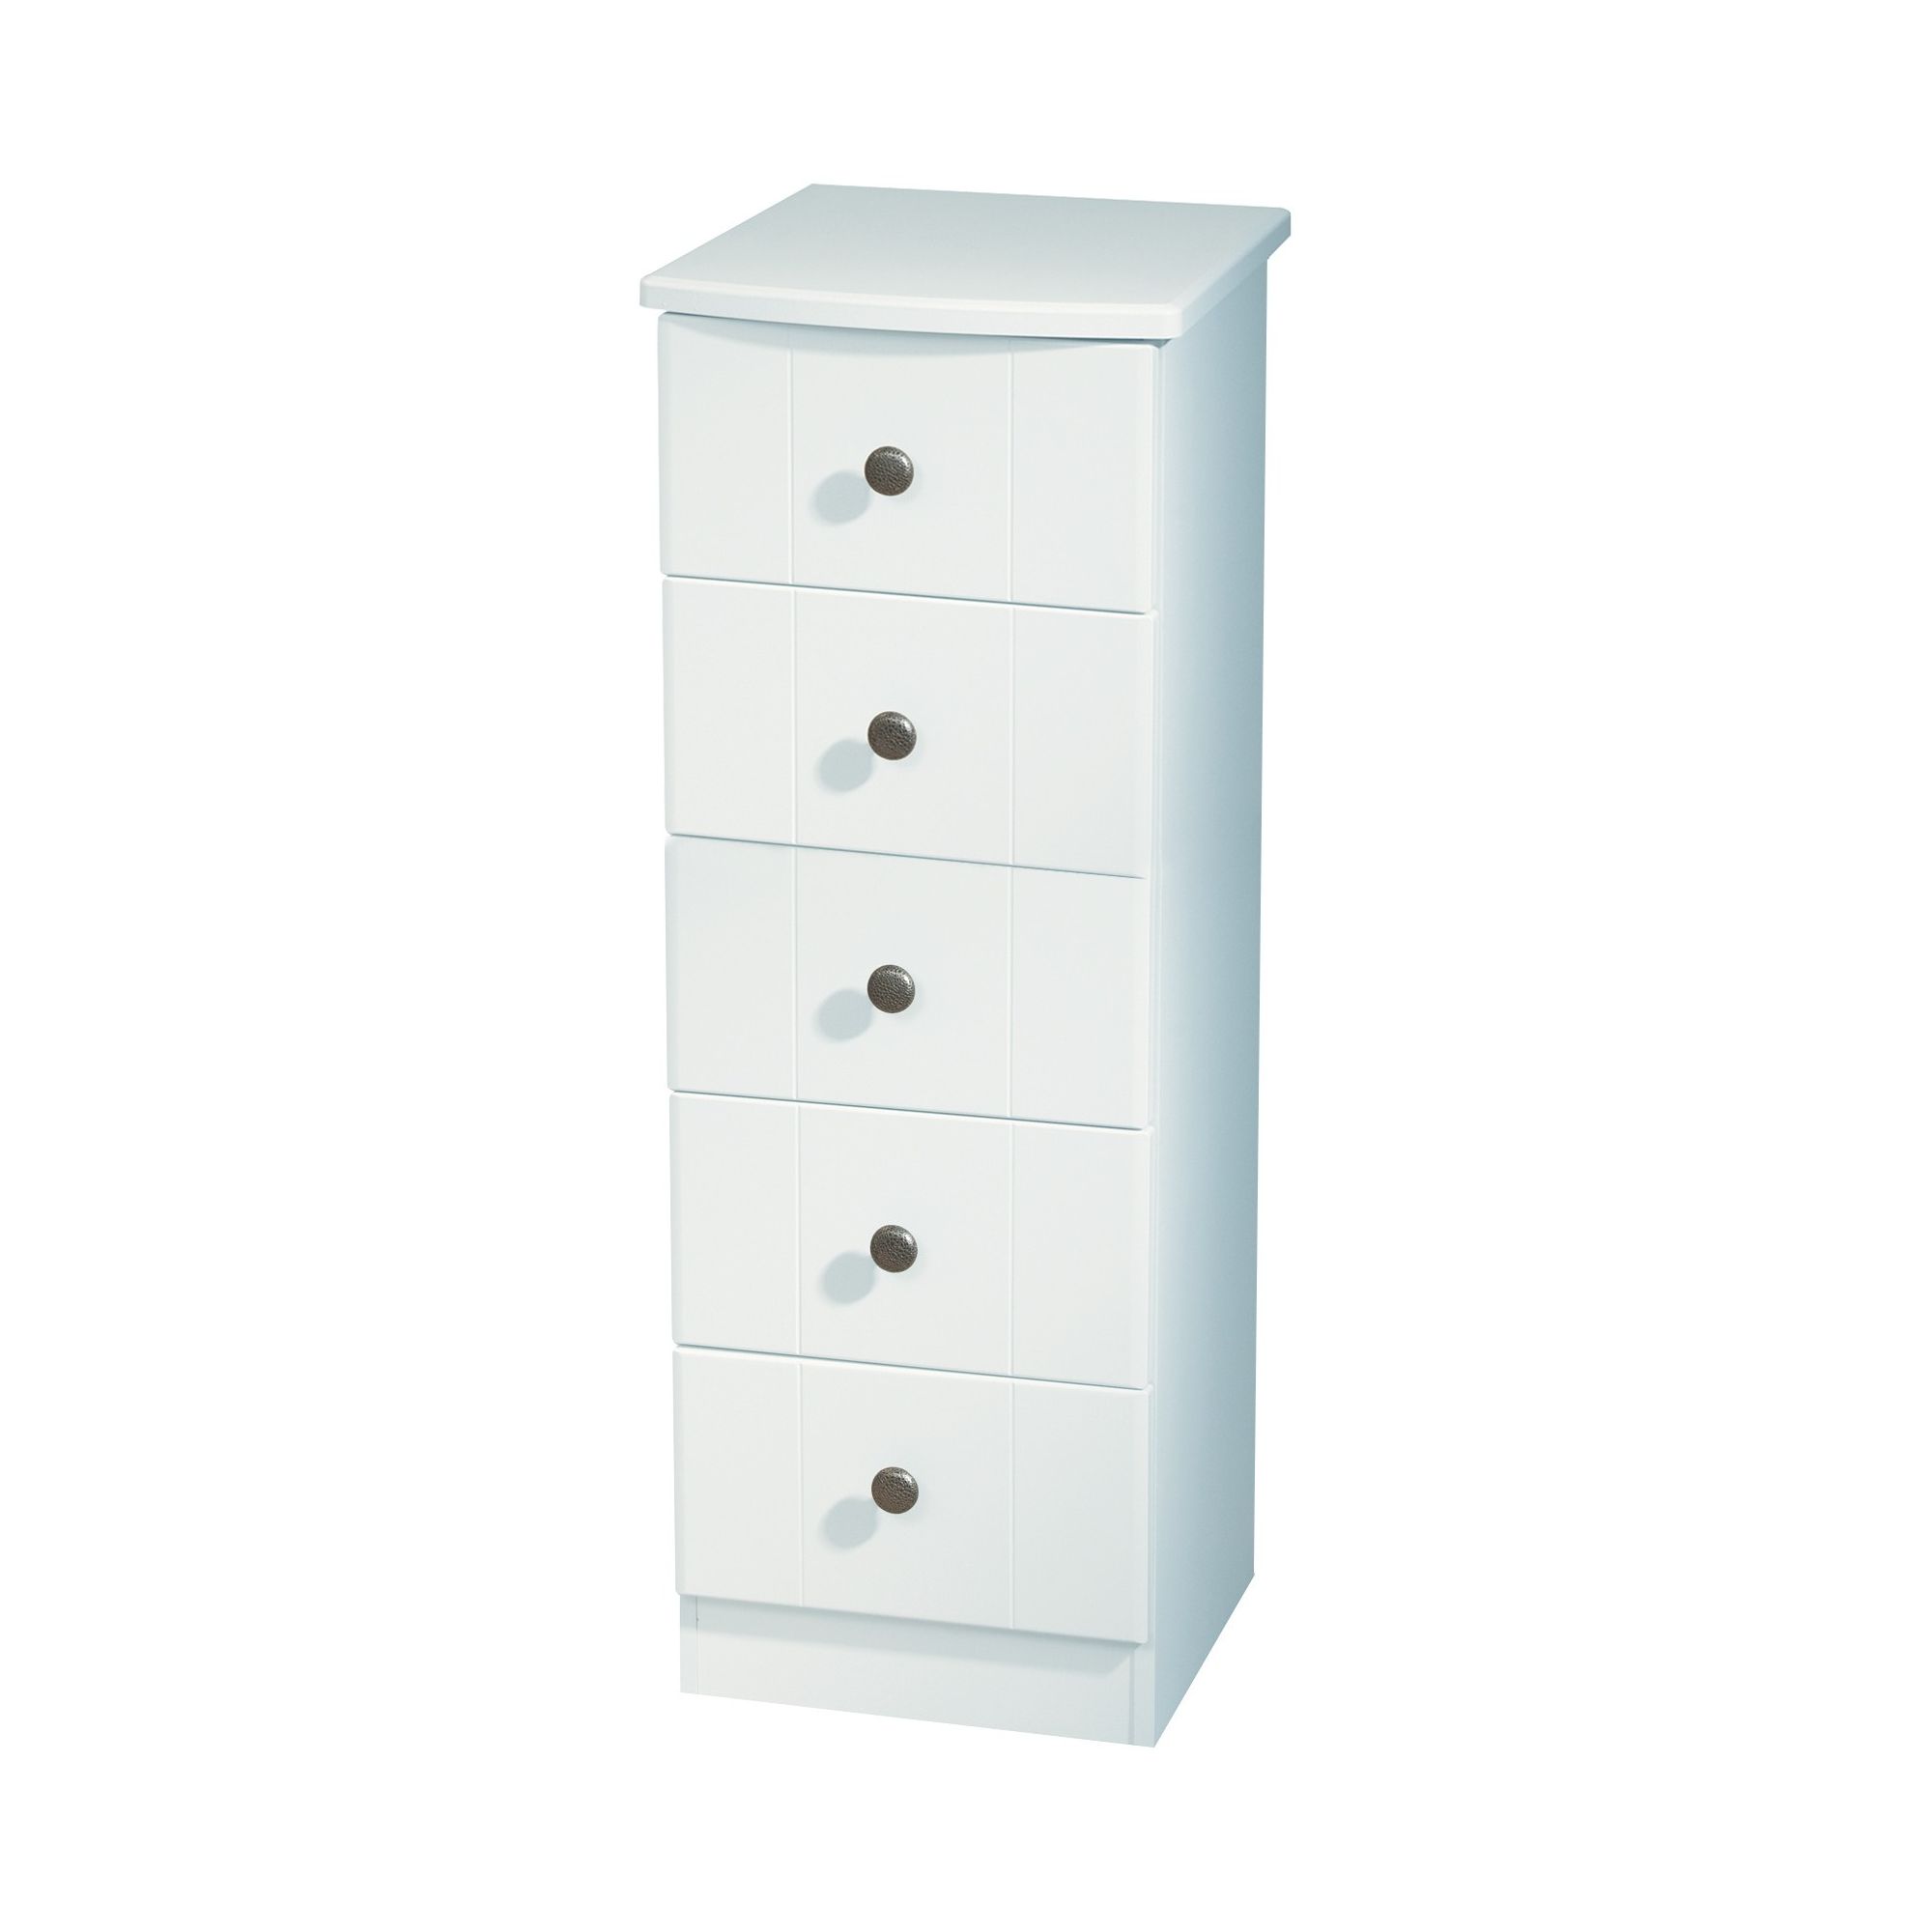 Welcome Furniture Kingston 5 Drawer Chest with Locker - White at Tesco Direct